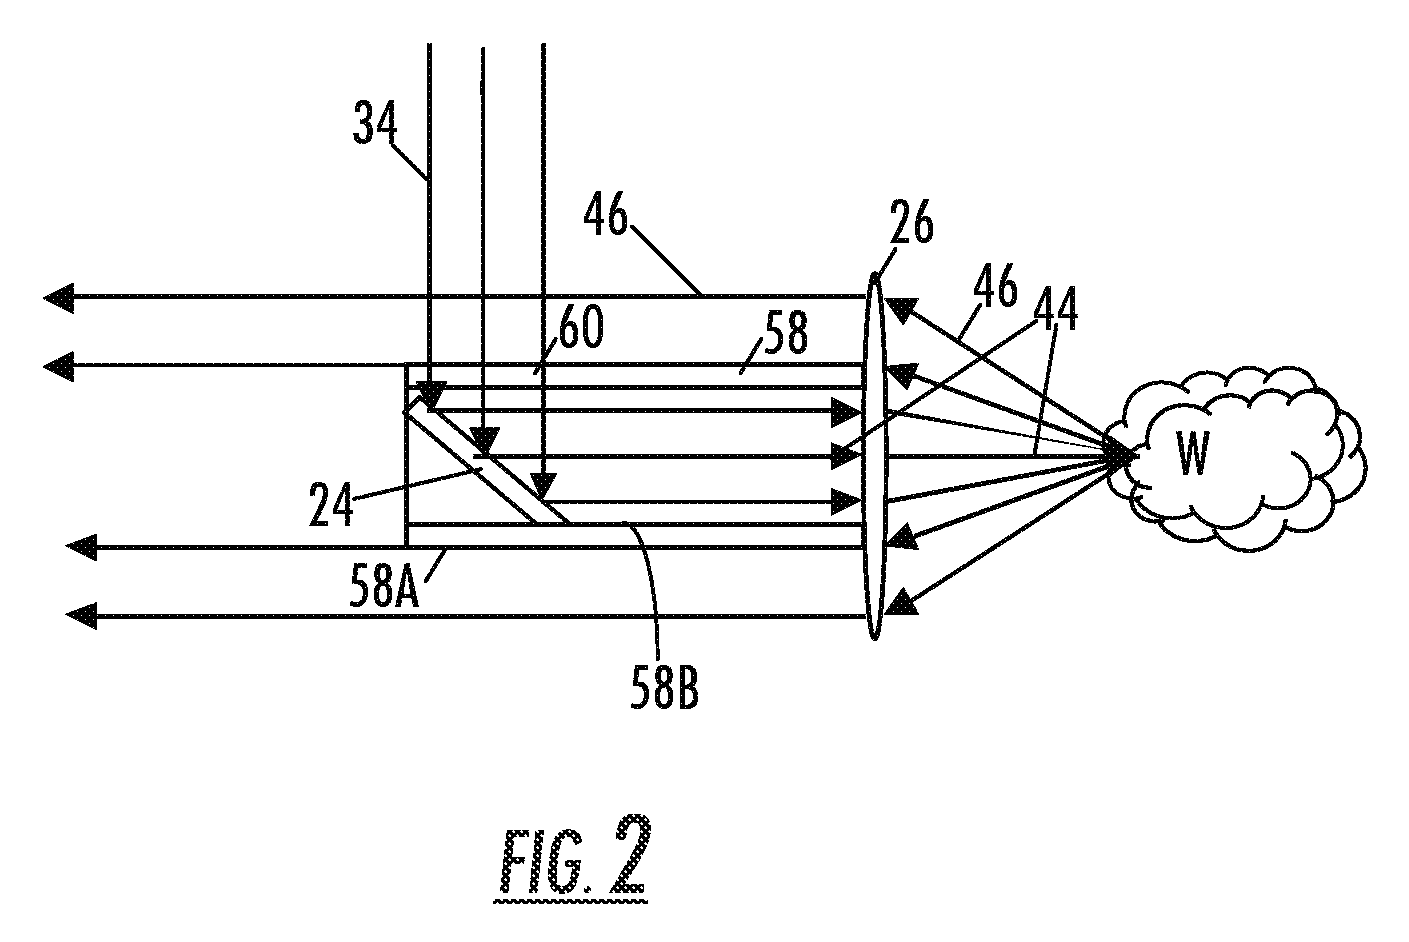 Self-contained multivariate optical computing and analysis system